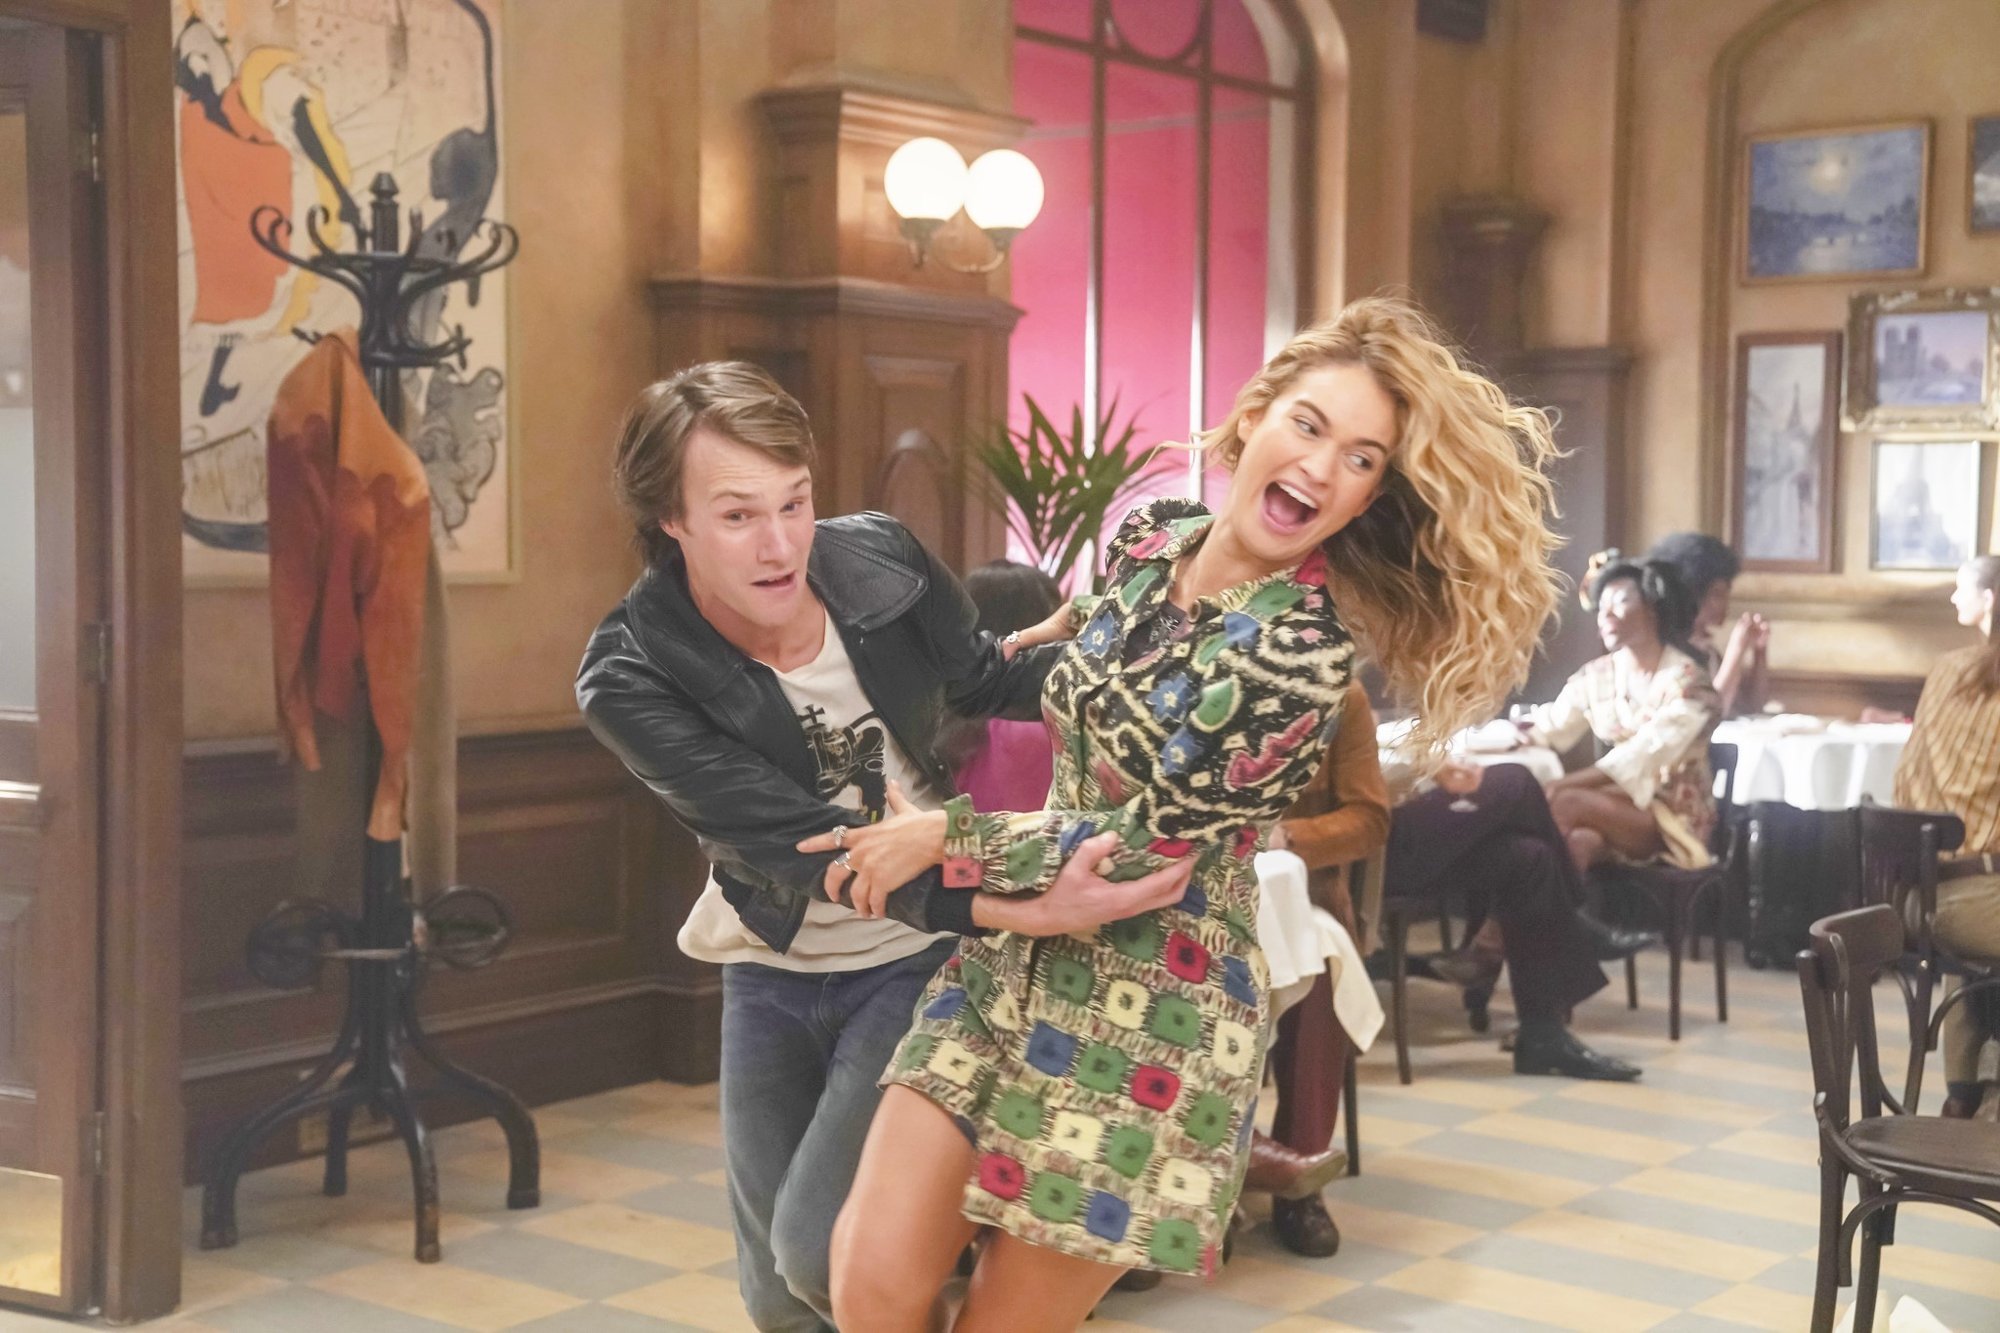 Hugh Skinner stars as Young Harry and Lily James stars as Young Donna in Universal Pictures' Mamma Mia! Here We Go Again (2018)